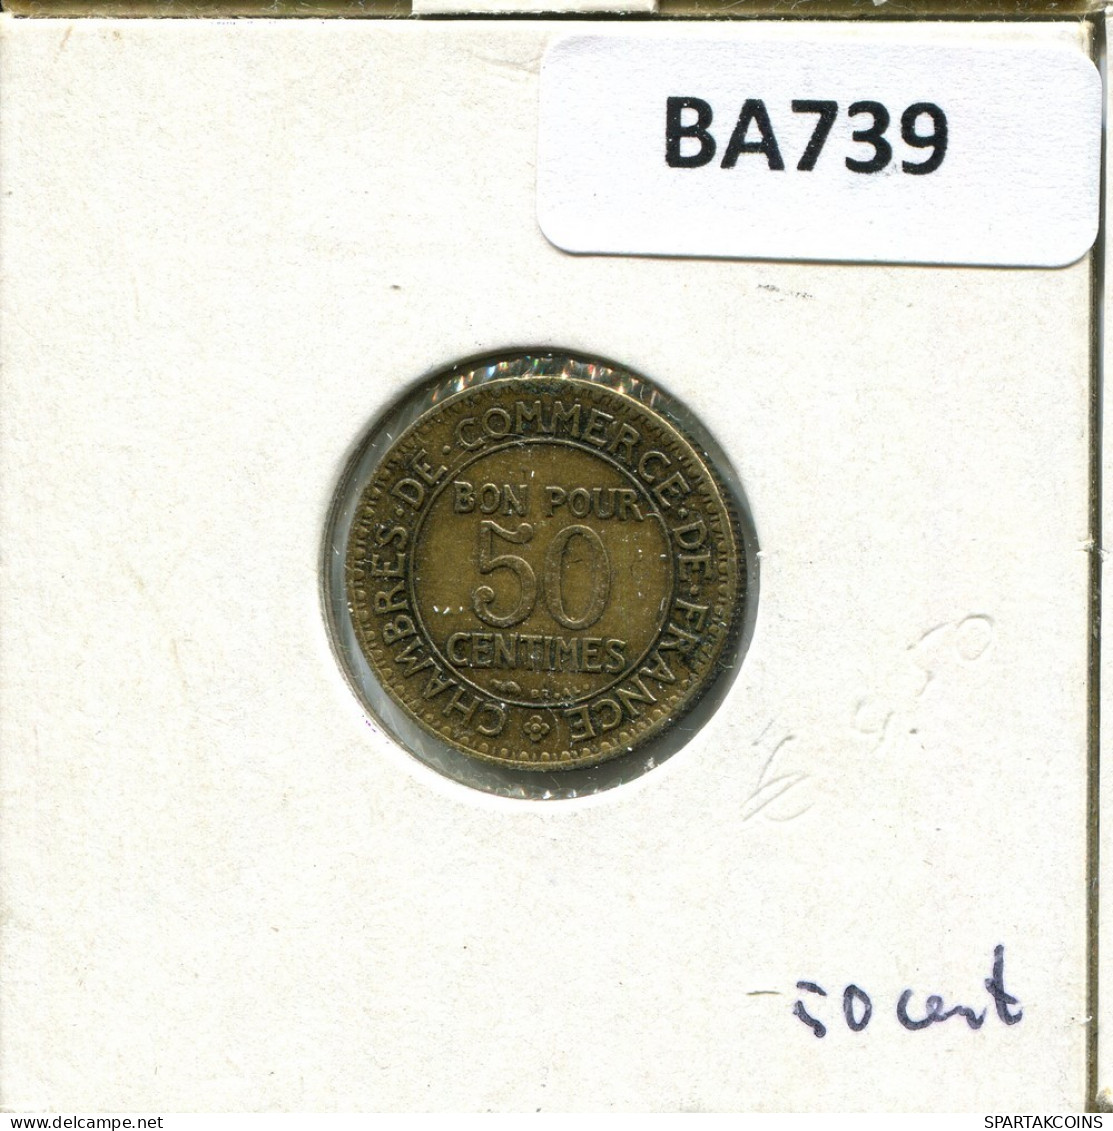 50 CENTIMES 1921 FRANCE French Coin #BA739.U.A - 50 Centimes